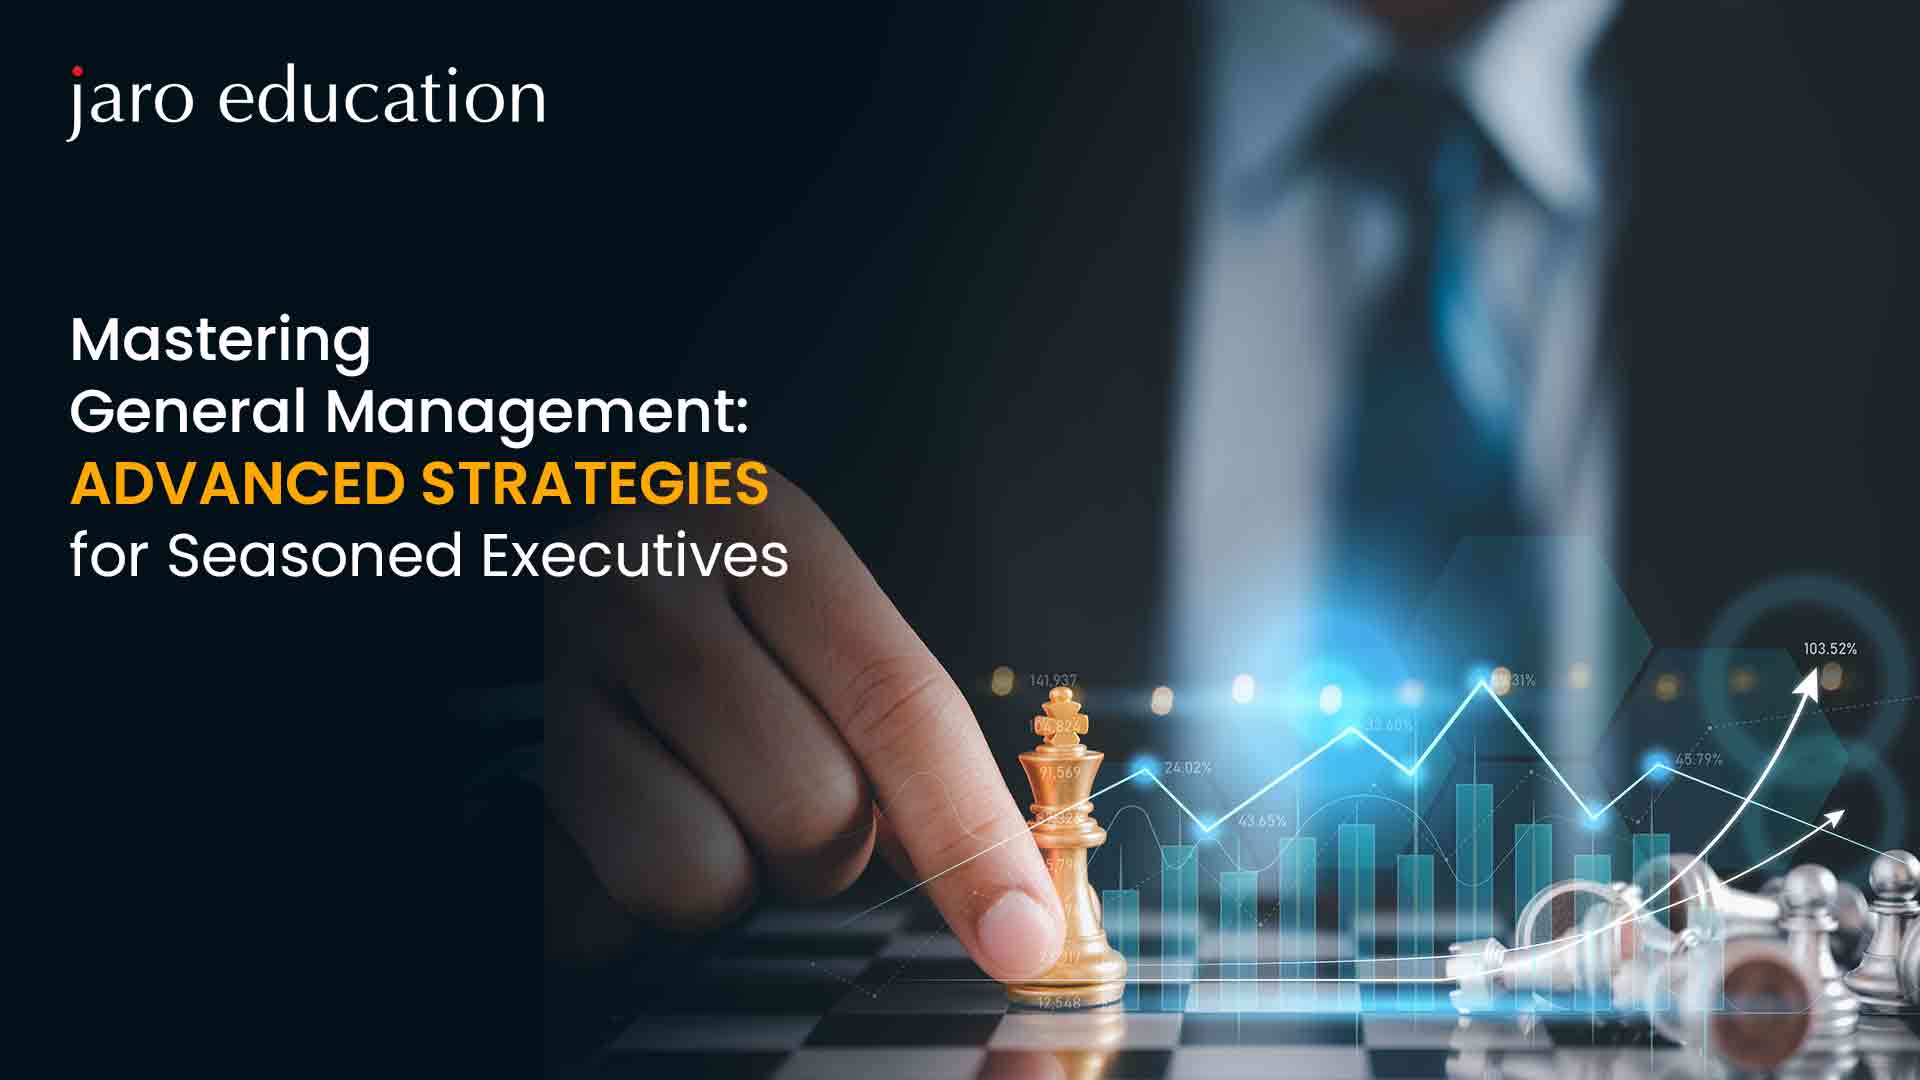 Mastering General Management Advanced Strategies for Seasoned Executives